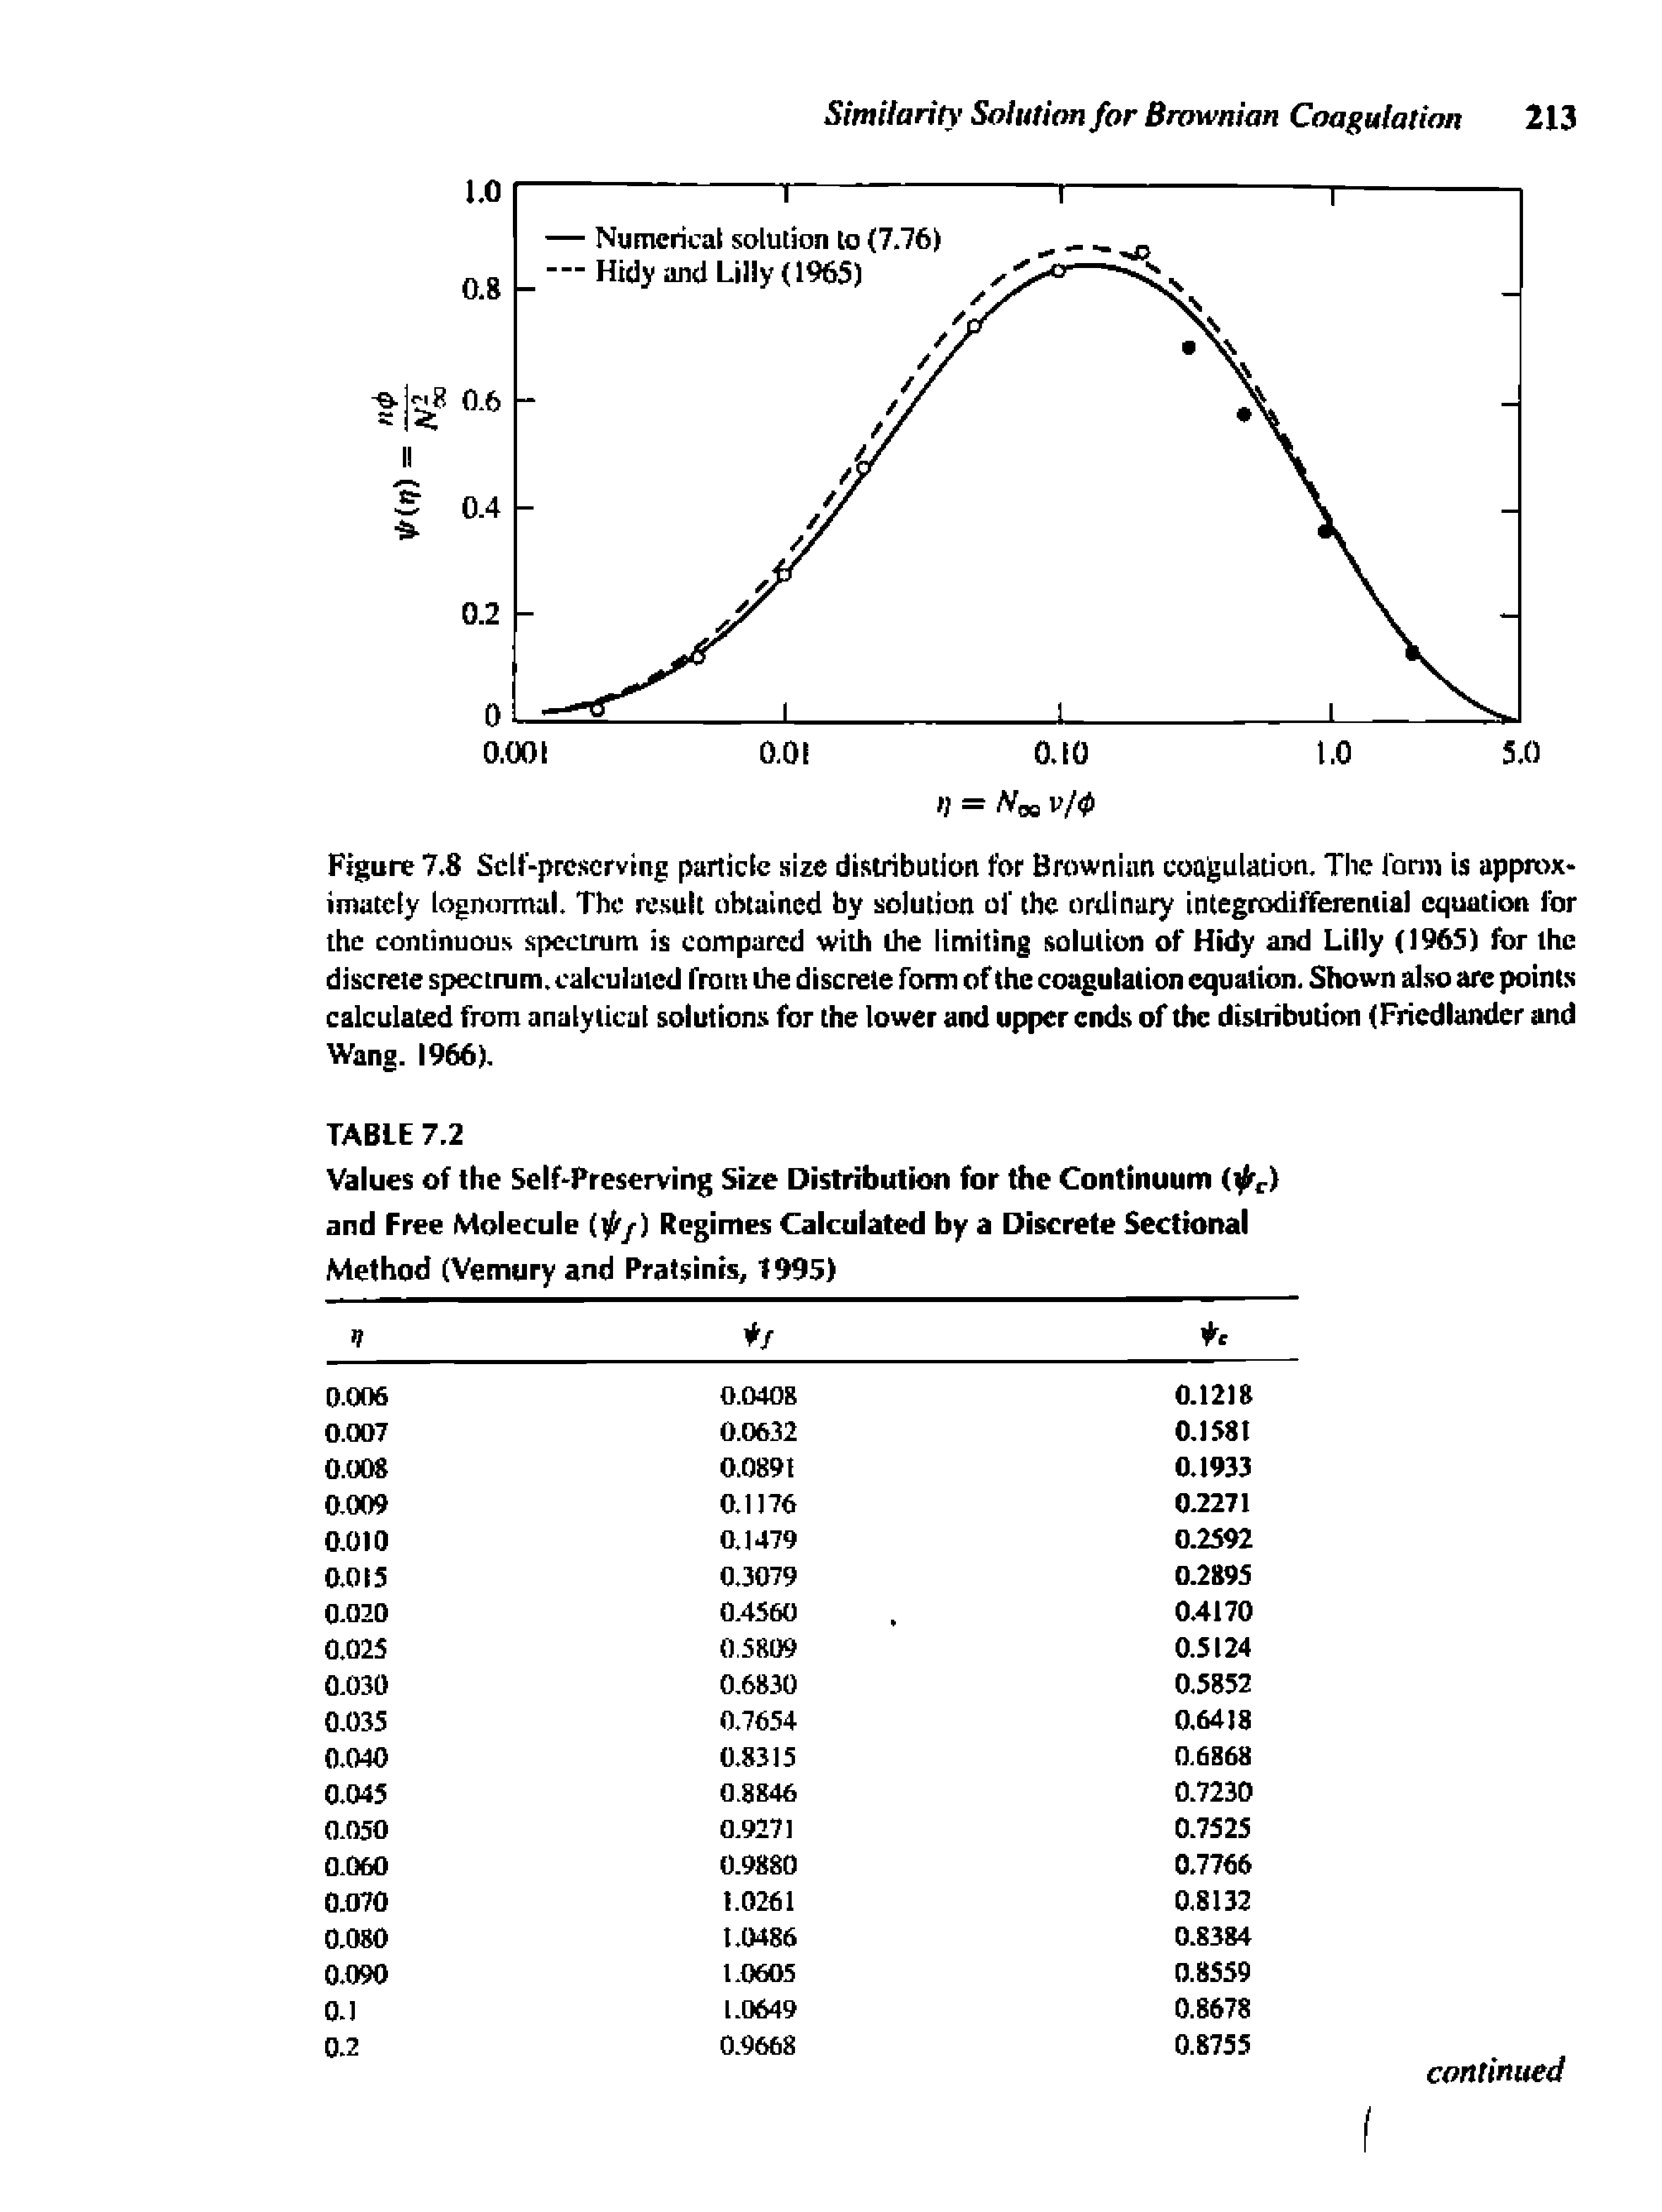 Figure 7.8 Sdt -prcscrving particle size distribution for Brownian coagulation, Tlie Ibnn is appaw-imatcly lognormal. The re.sult obtained by solution of the ordinary integrodiffereniial equation for the continuous spectrum is compared with the limiting solution of Hidy and Lilly (1965) for the discrete spectrum, calculated from the discrete form of the coagulation equation. Shown also are points calculated from analytical solutions for the lower and upper ends of the distribution (Friedlandcr and Wang. 1966).